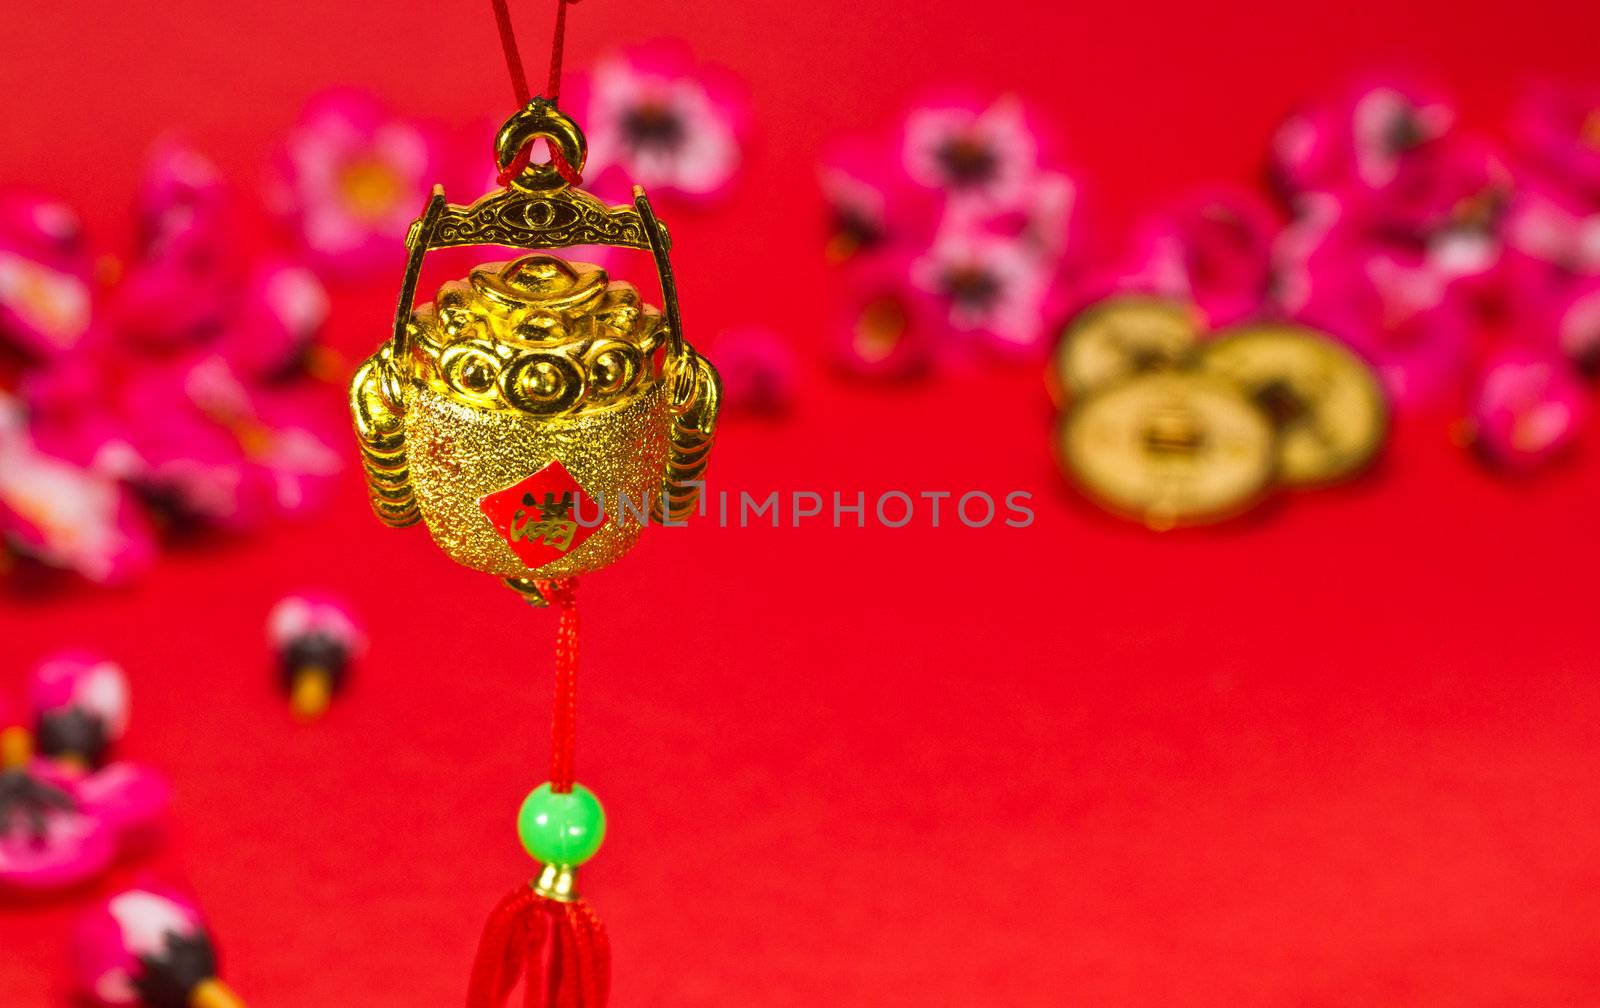 Chinese New Year ornament on red background for festive using